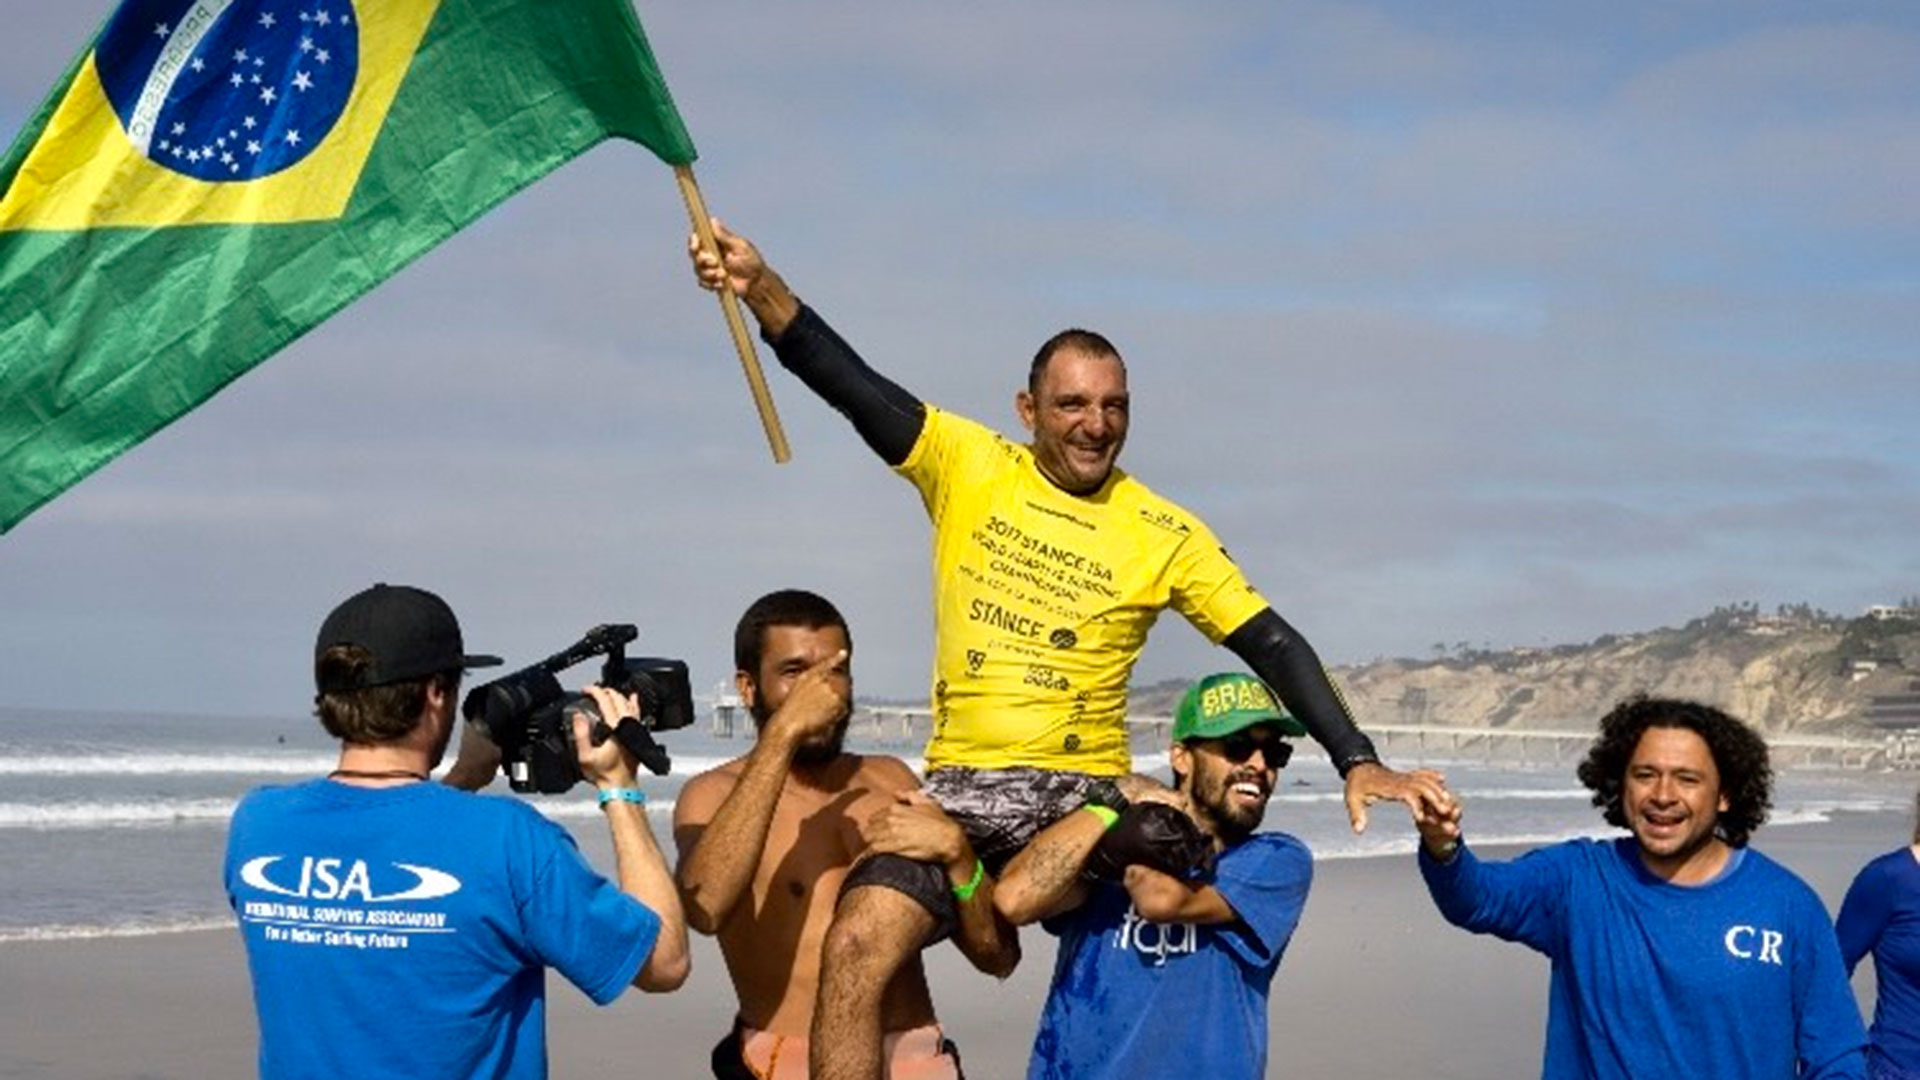 Brazilian Adaptive surfing pioneer Alcino Neto celebrates a gold medal at the 2017 Adaptive Surfing World Championships (ISA)